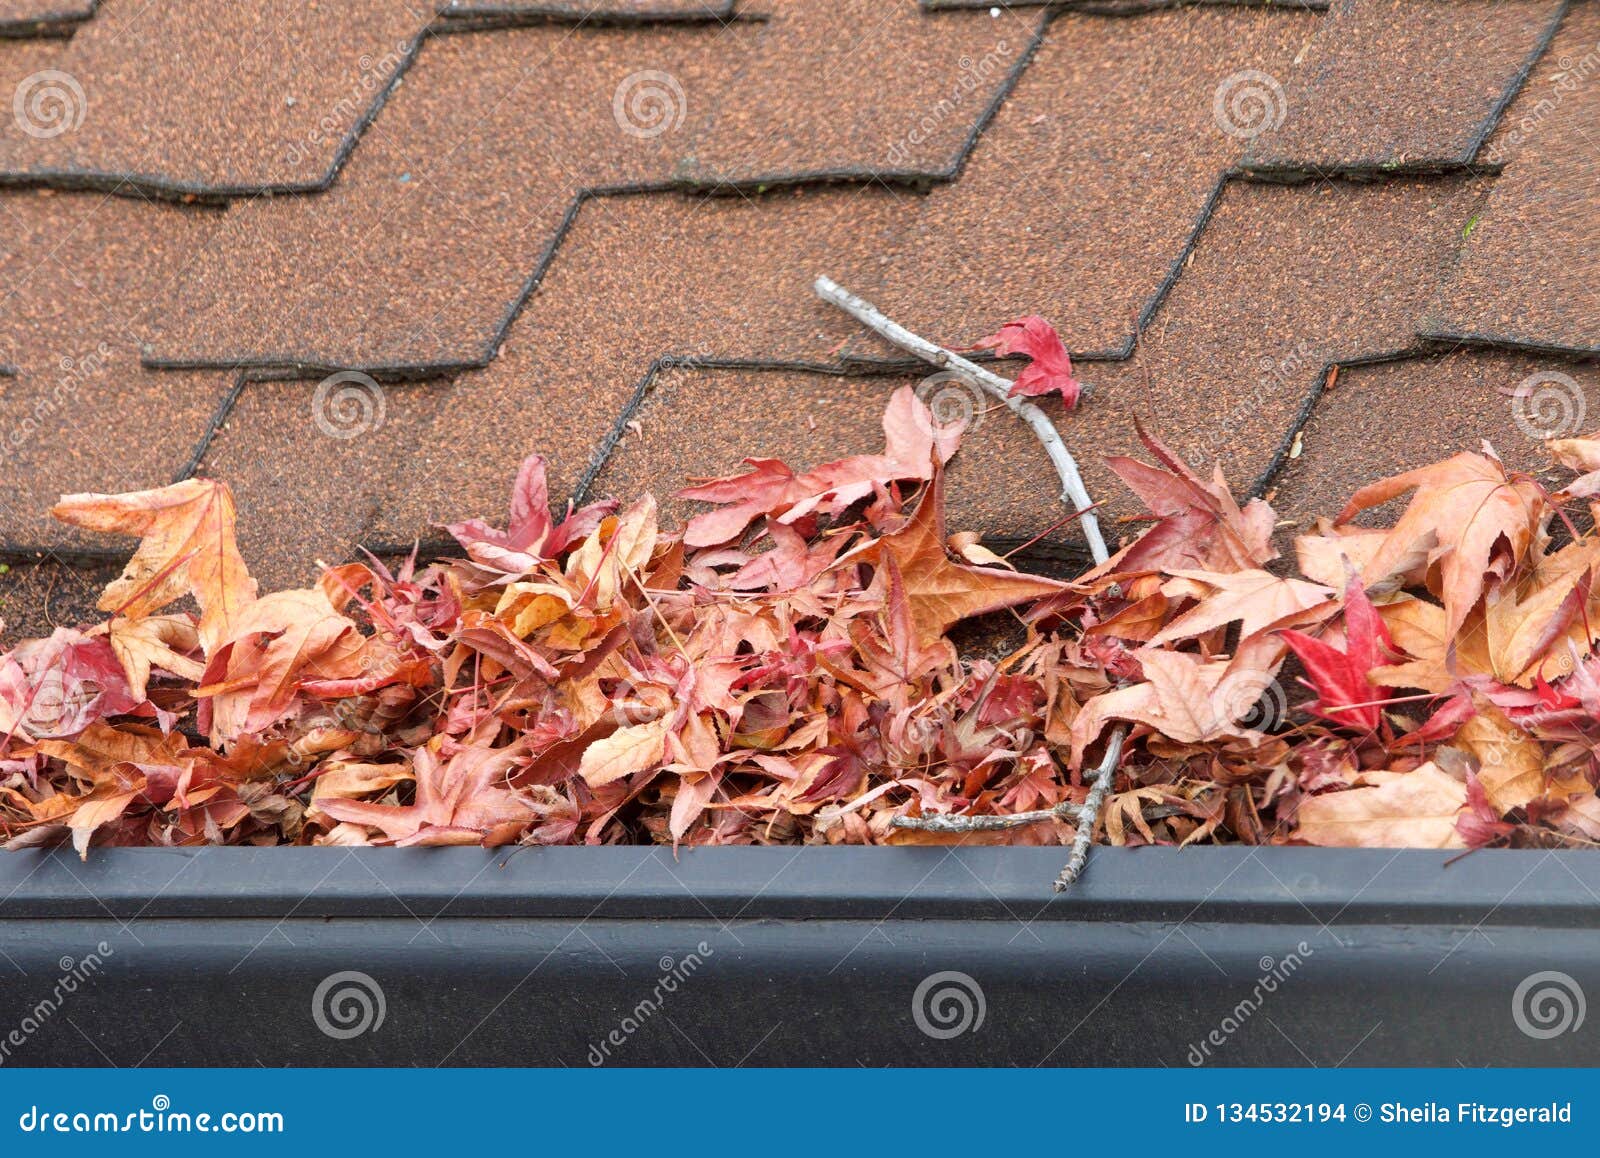 close up on rain gutter clogged with leaves and debris